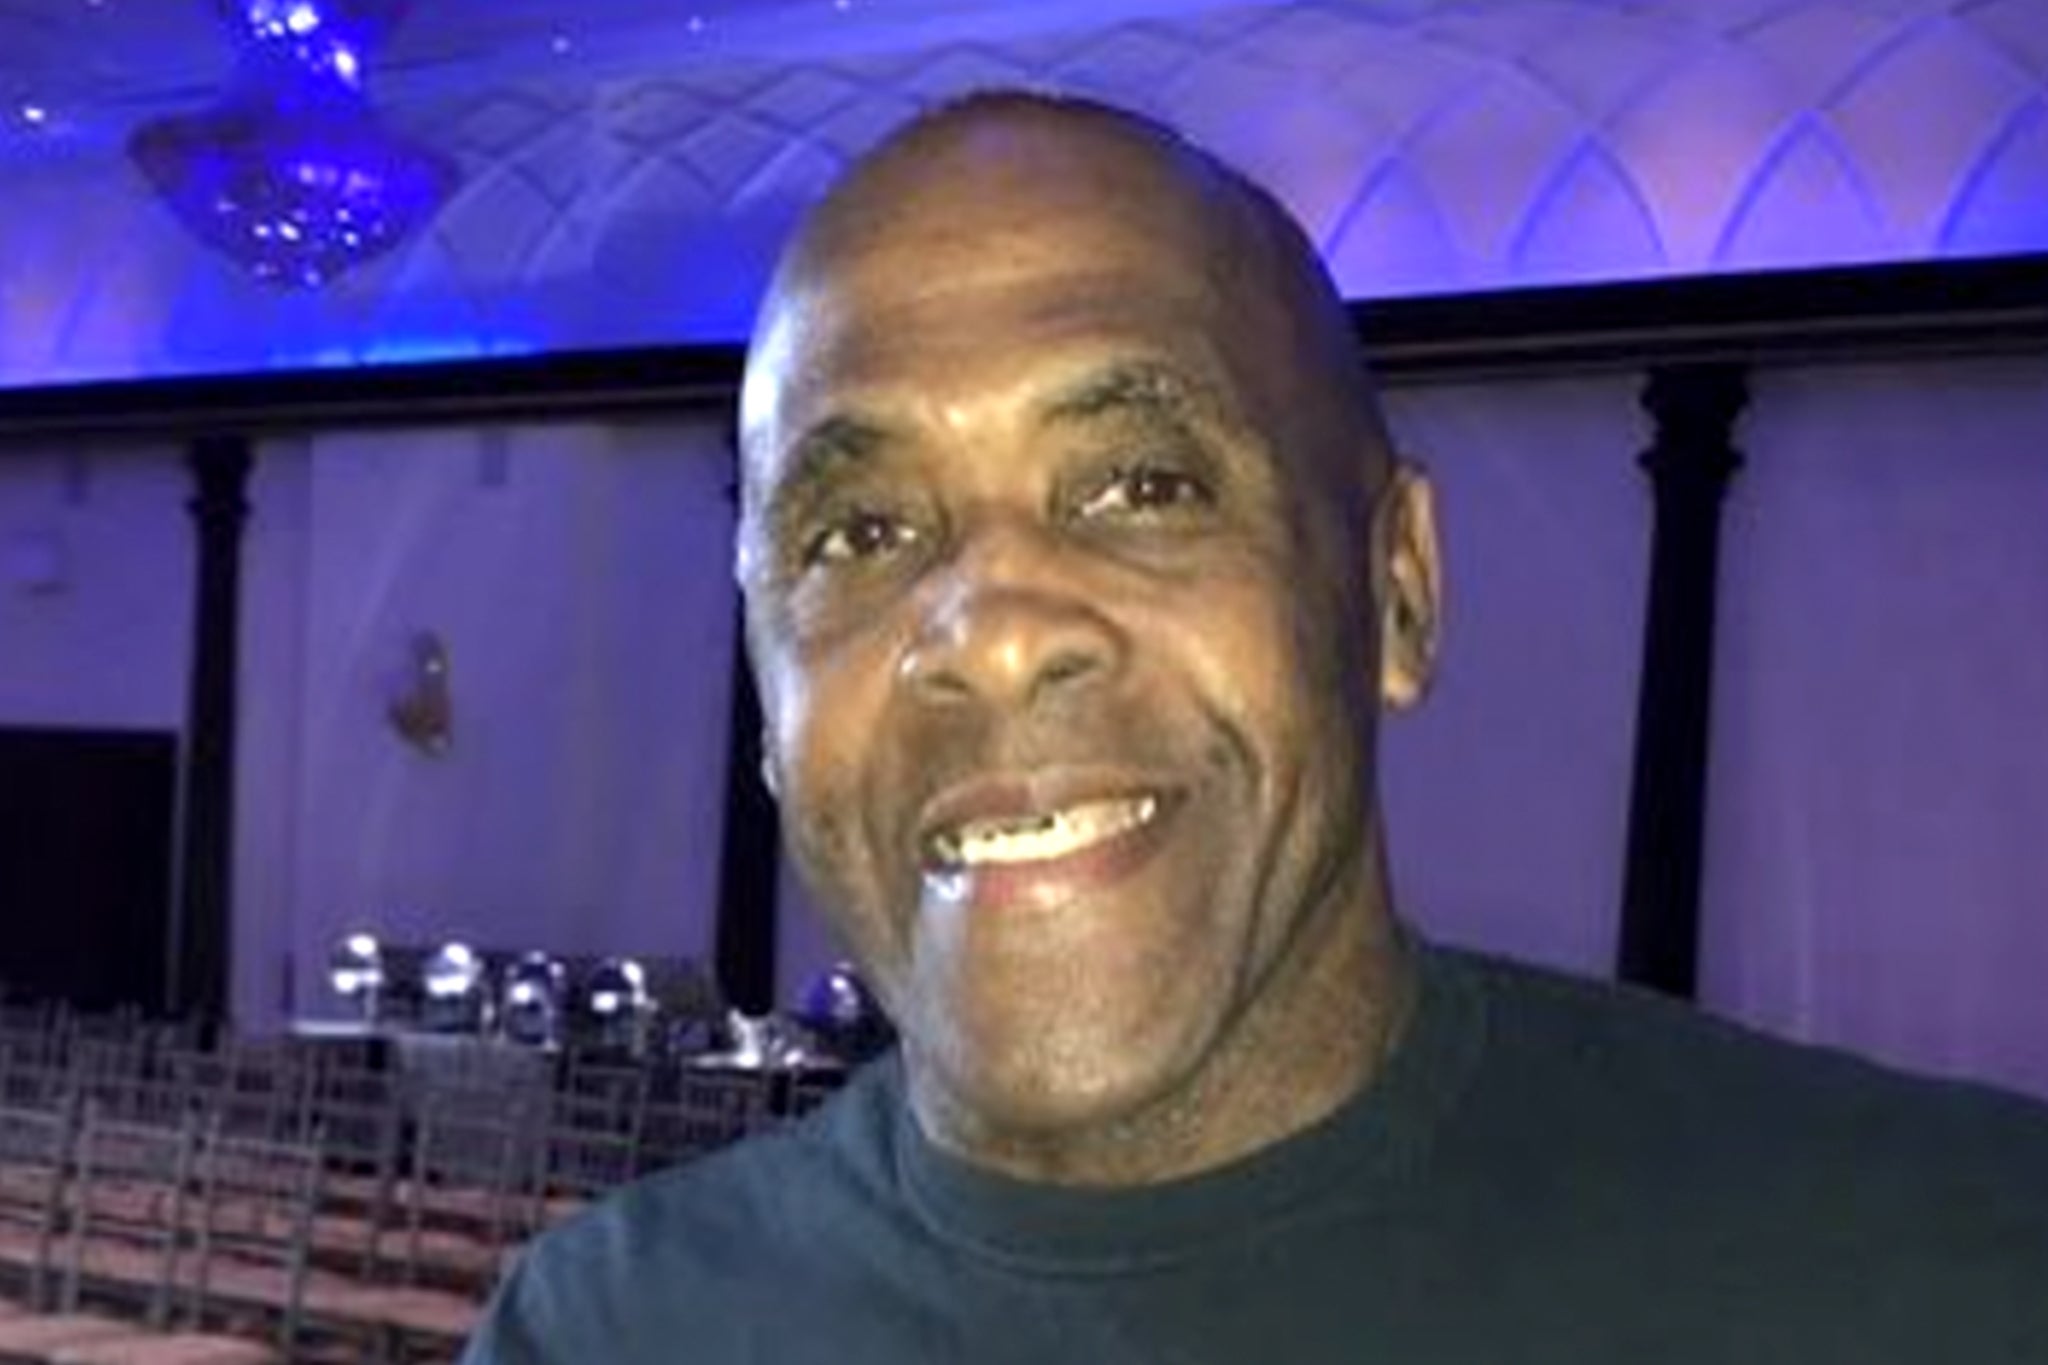 Virgil, the former WWE star best known for being the bodyguard for the “Million Dollar Man” Ted DiBiase, has died, according to a post on his verified Instagram account.